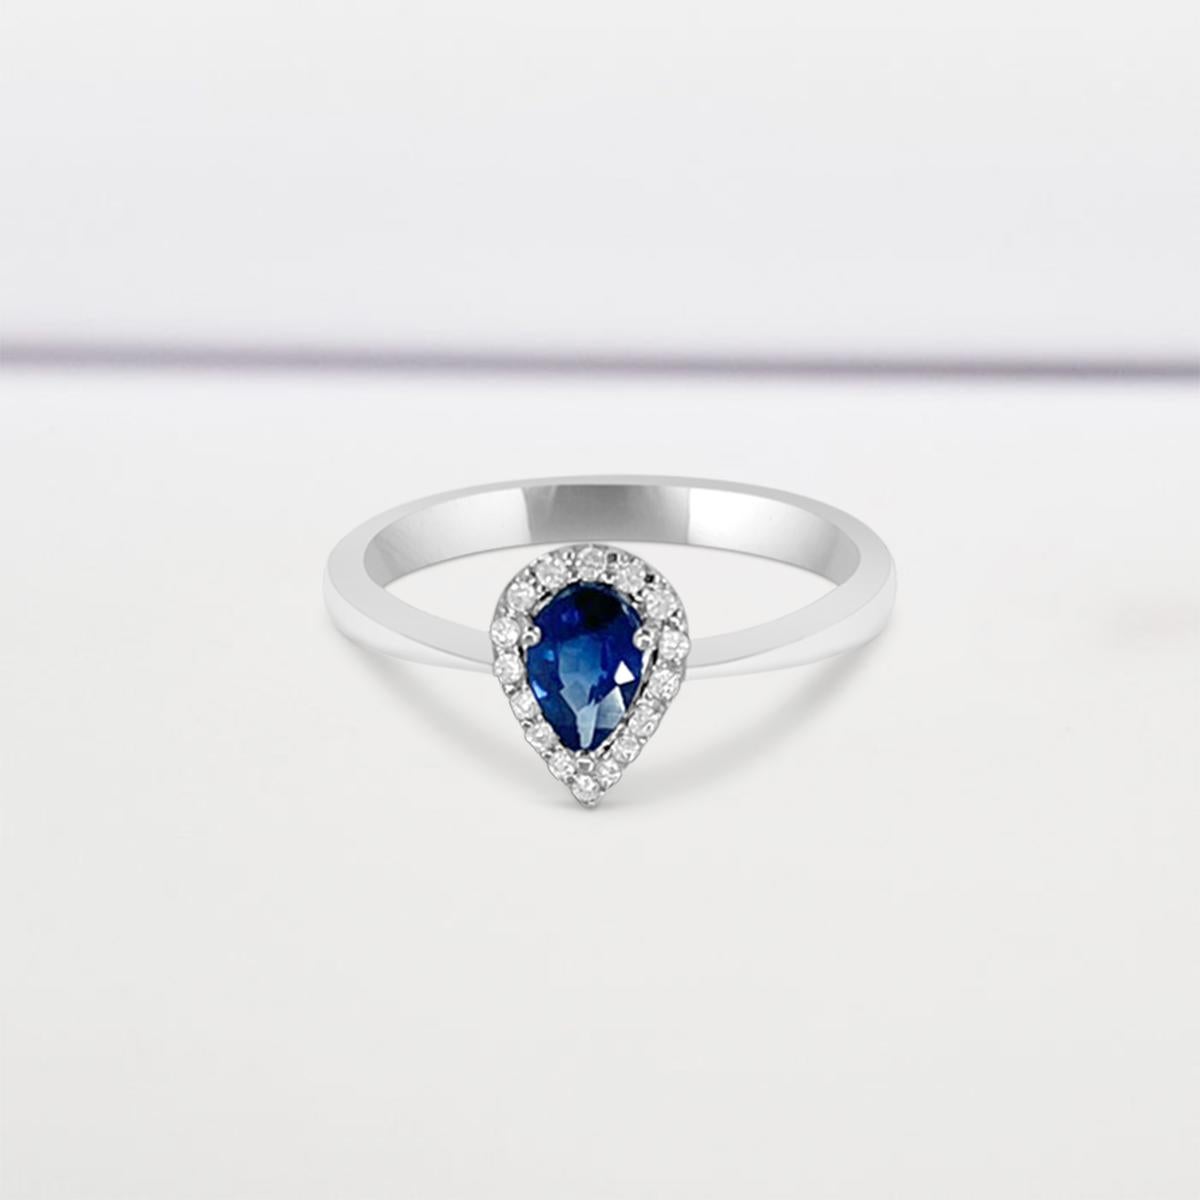 Modern 18K White Gold 0.46cts Sapphire and Diamond Ring, Style# TS1198R For Sale